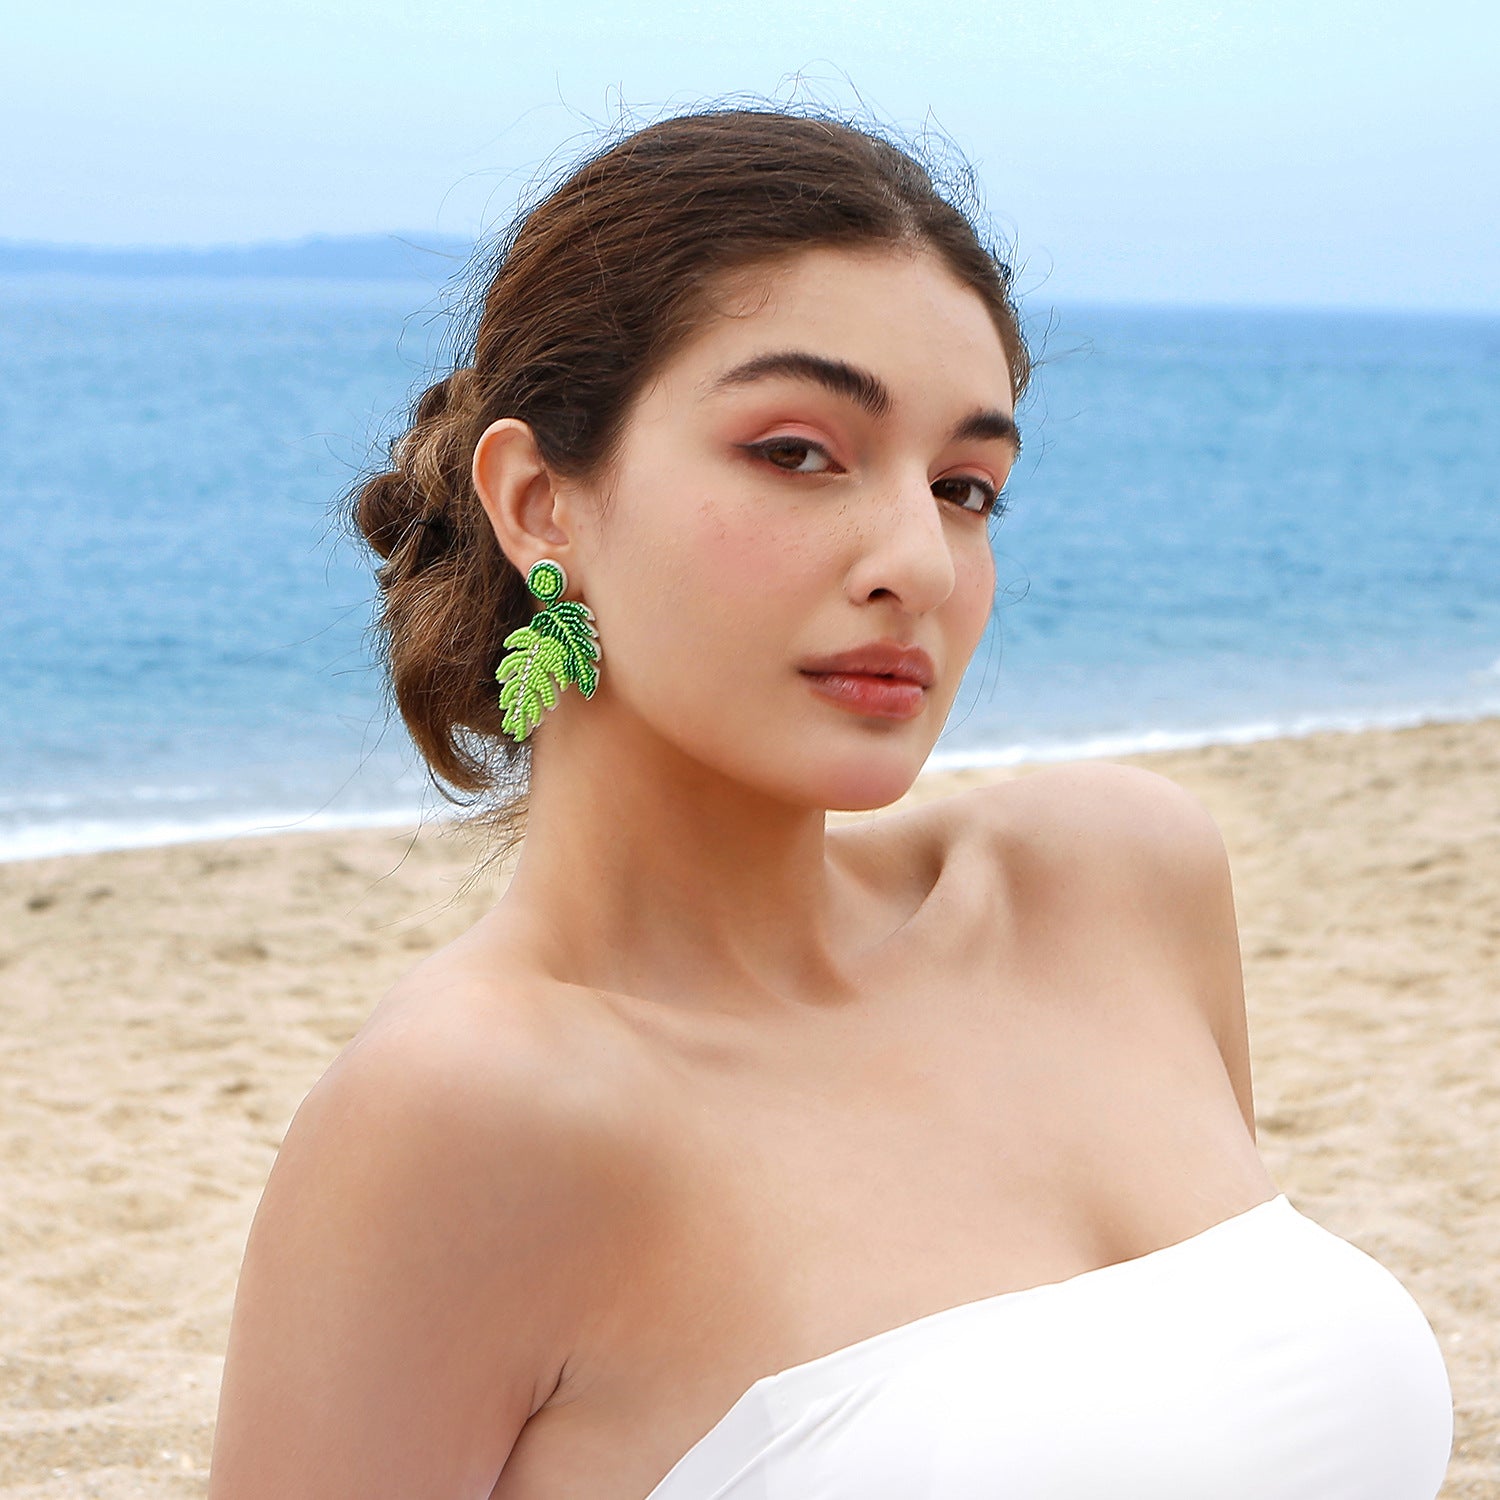 A woman by the beach embodies natural elegance with statement green leaf copper earrings, complementing her serene and graceful seaside style.